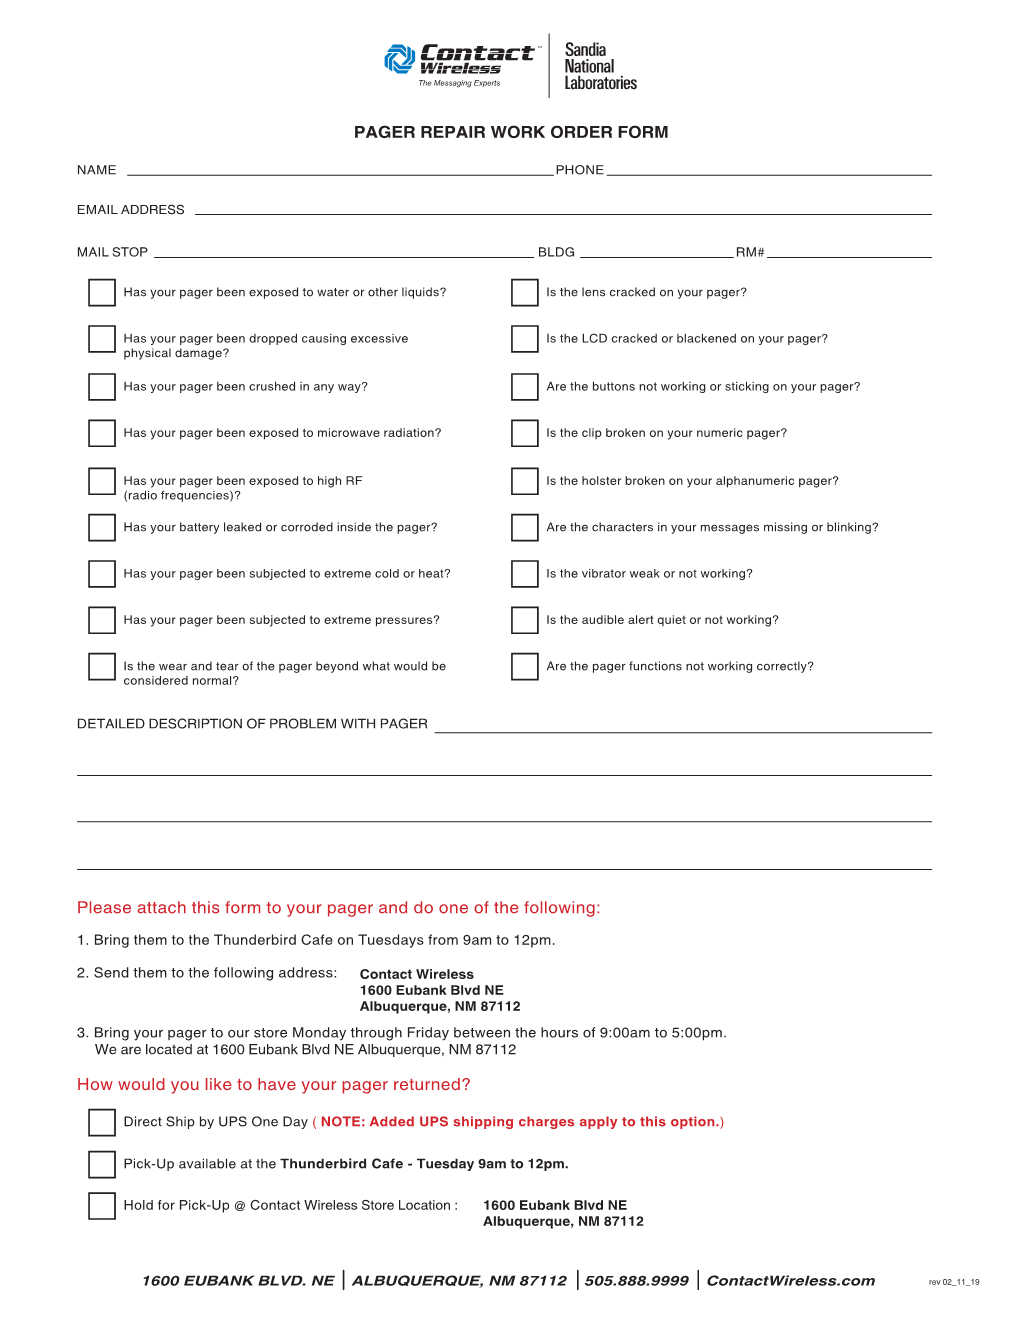 Pager Repair Form